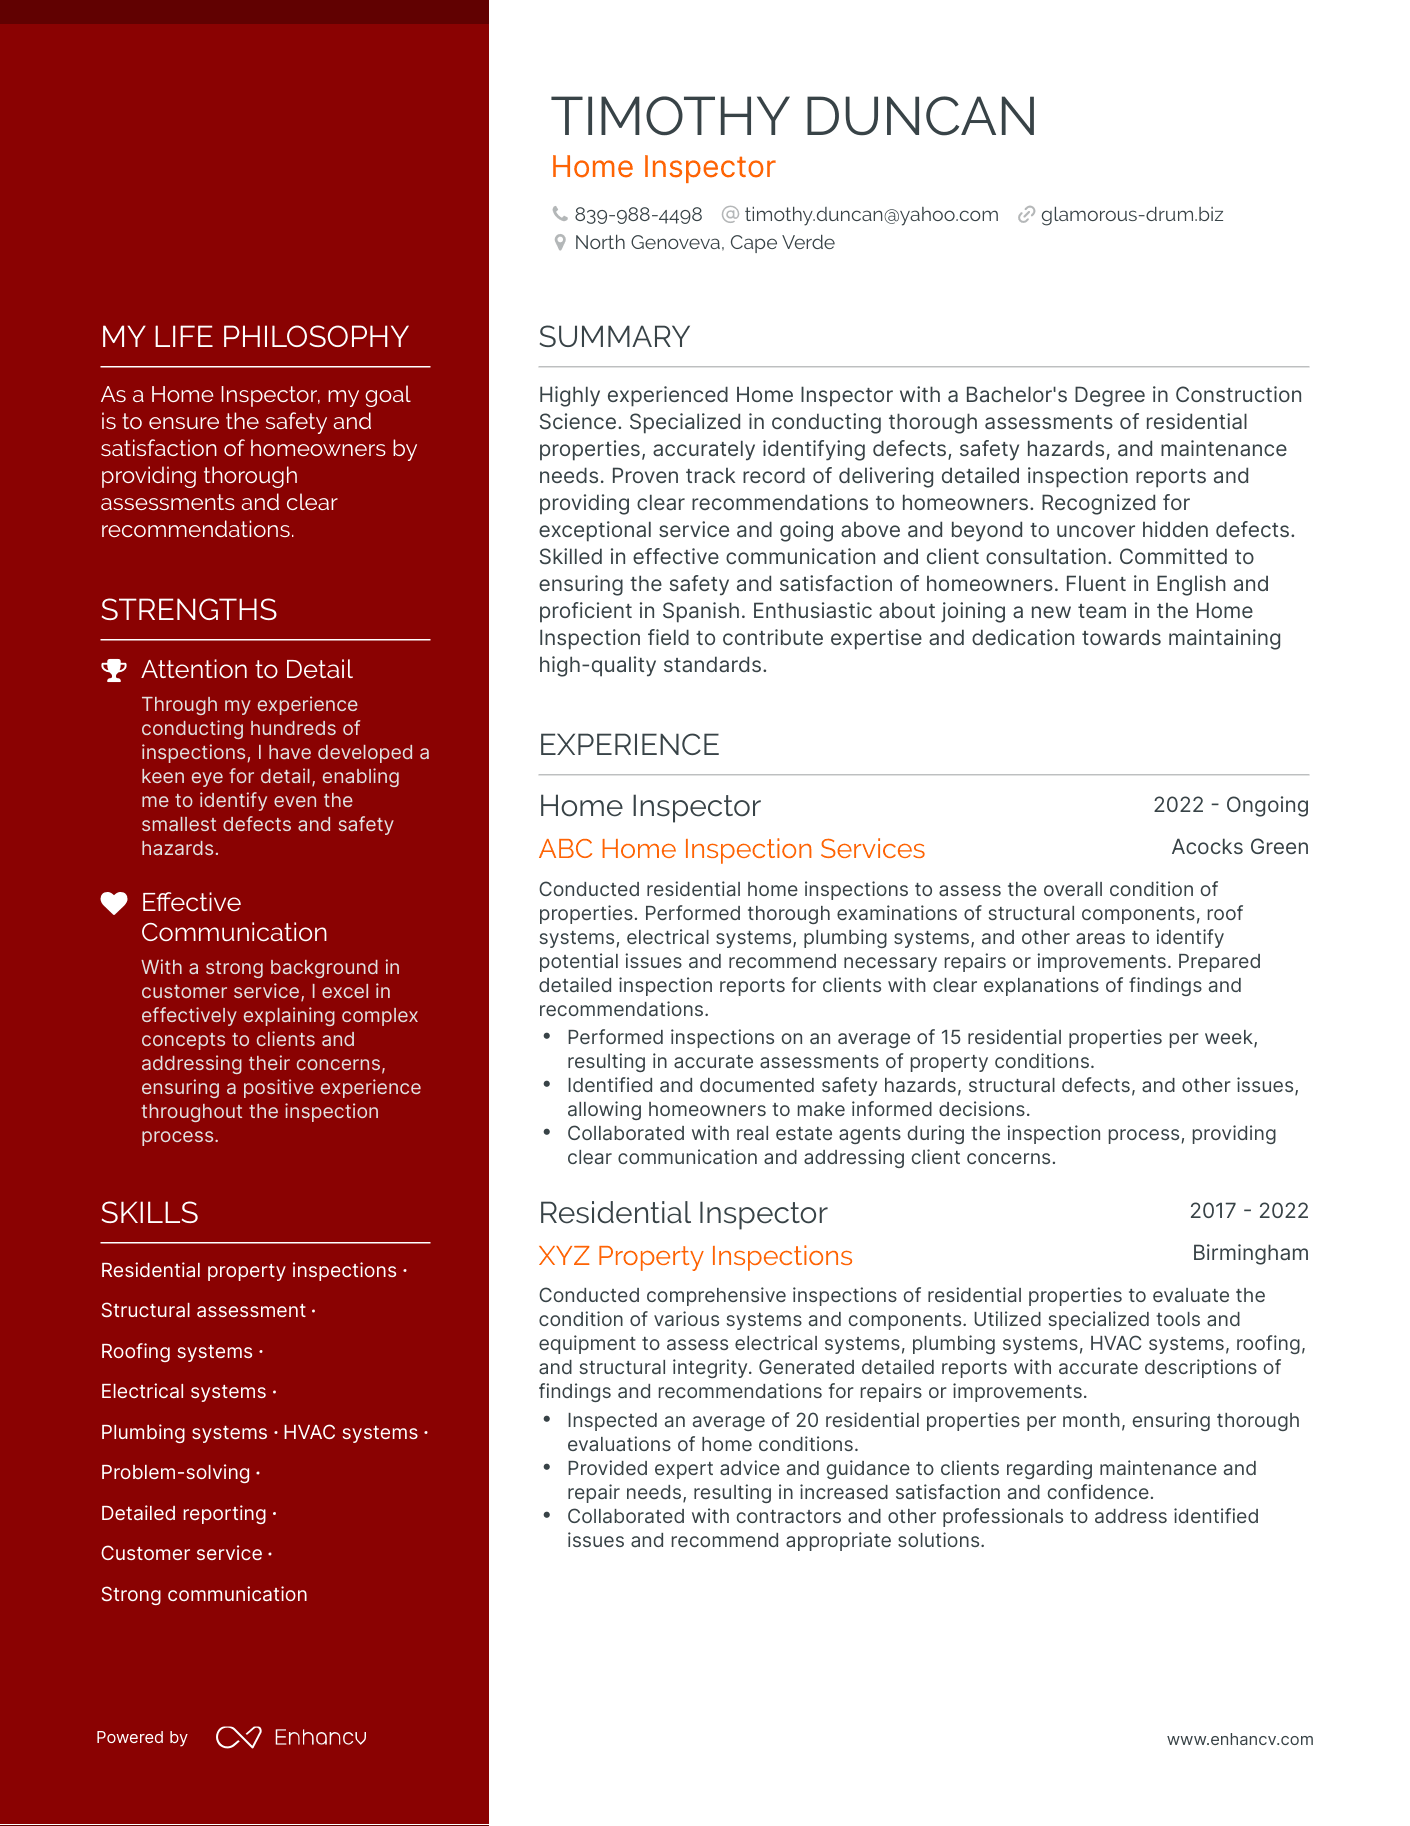 Home Inspector resume example